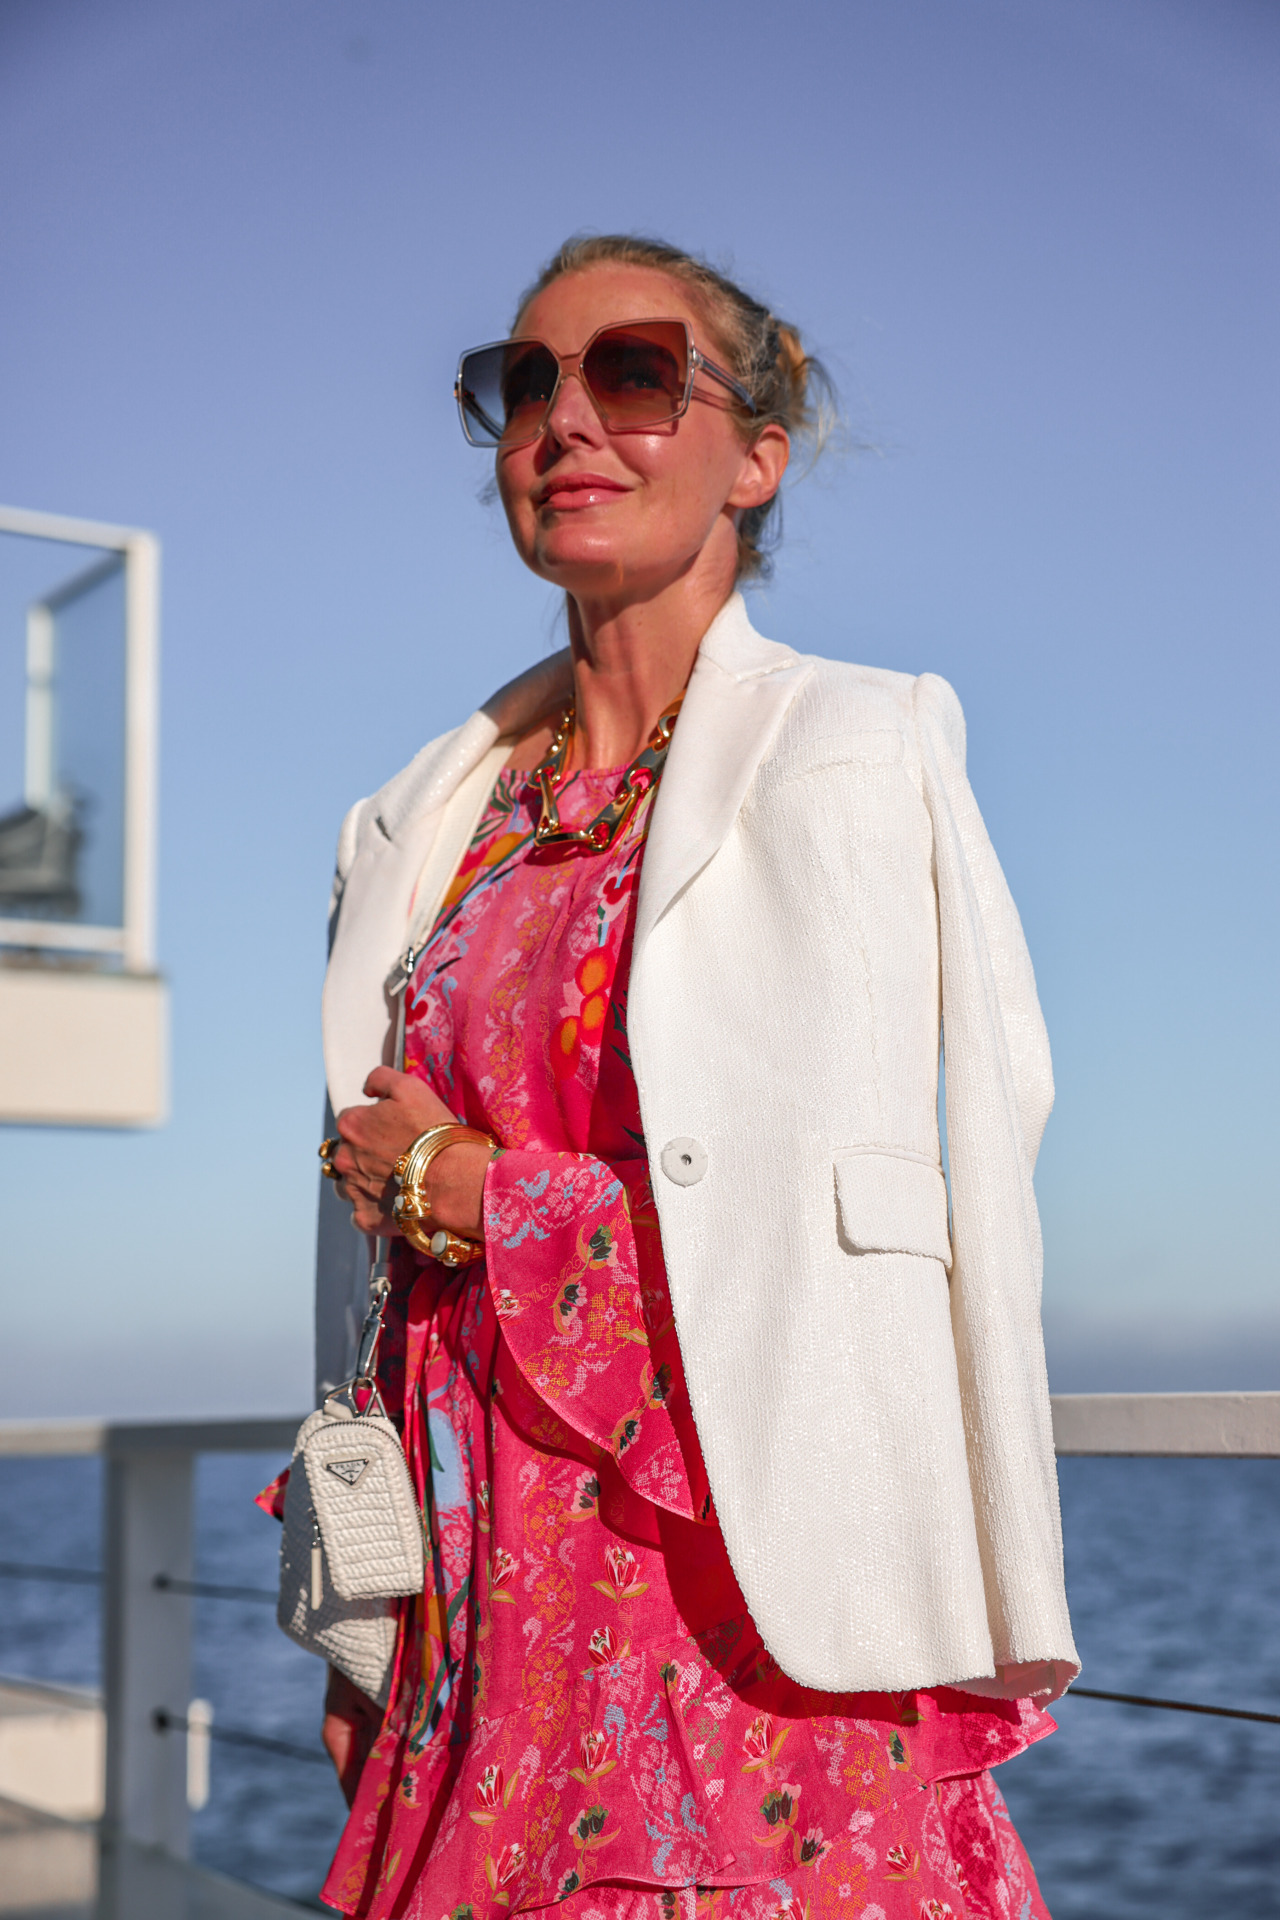 Expand time, reduce anxiety with fashion over 40 blogger Erin Busbee at Malibu beach in Saloni pink floral dress